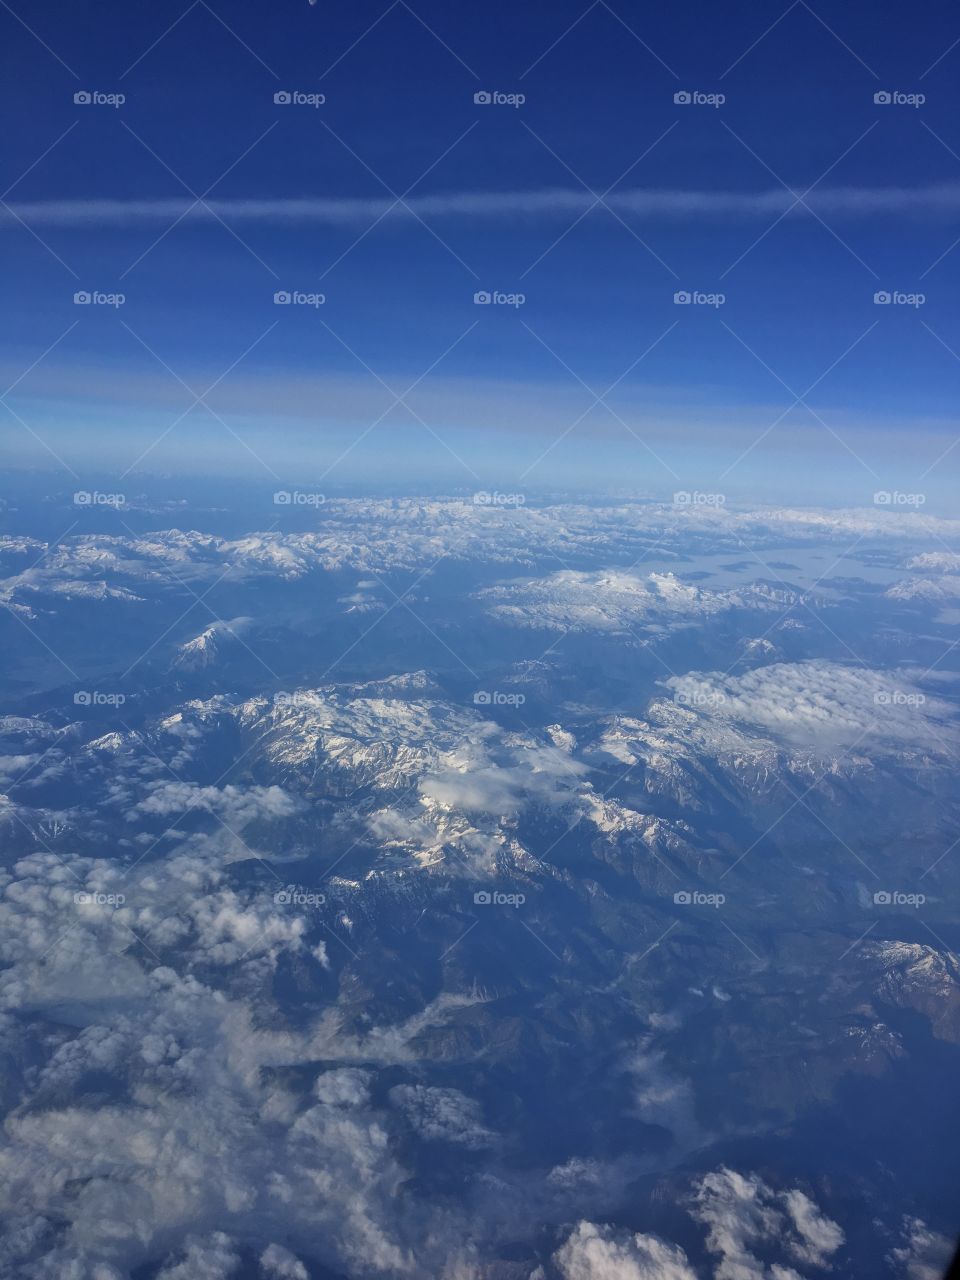 Mountain from a plane 